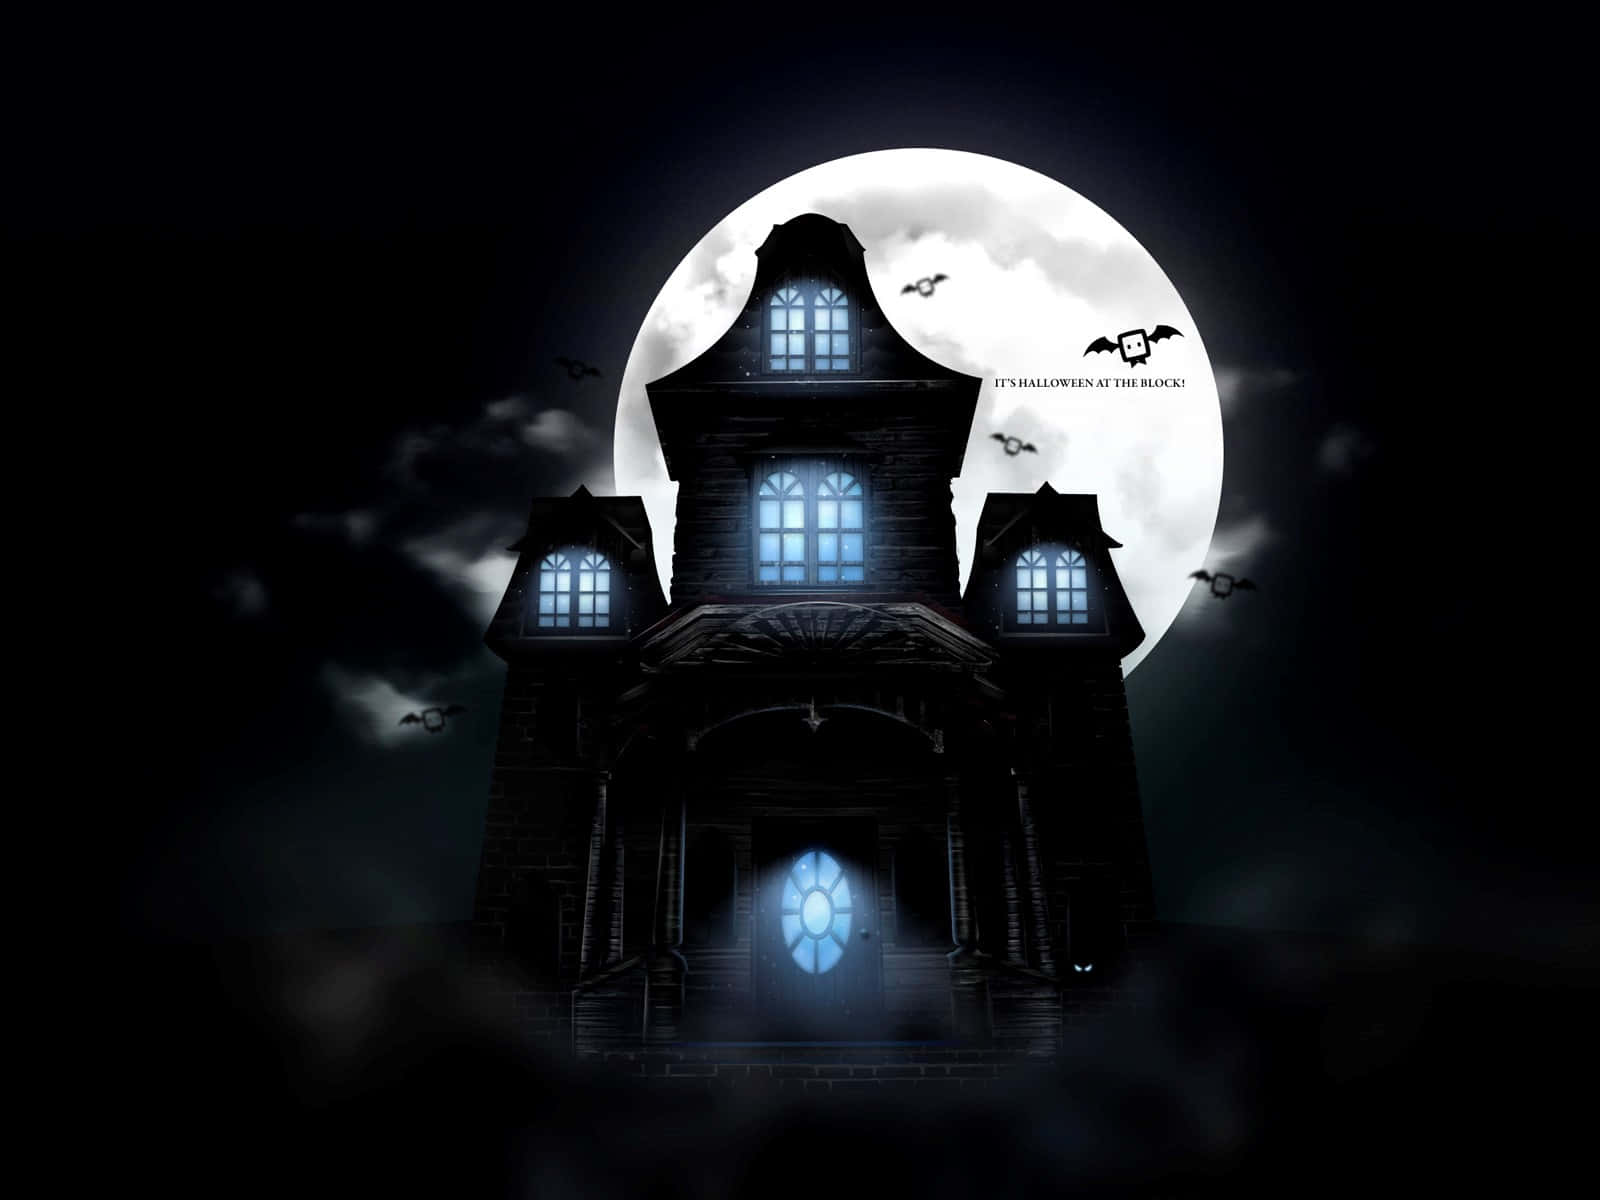 Explore the haunted depths of the eerie house